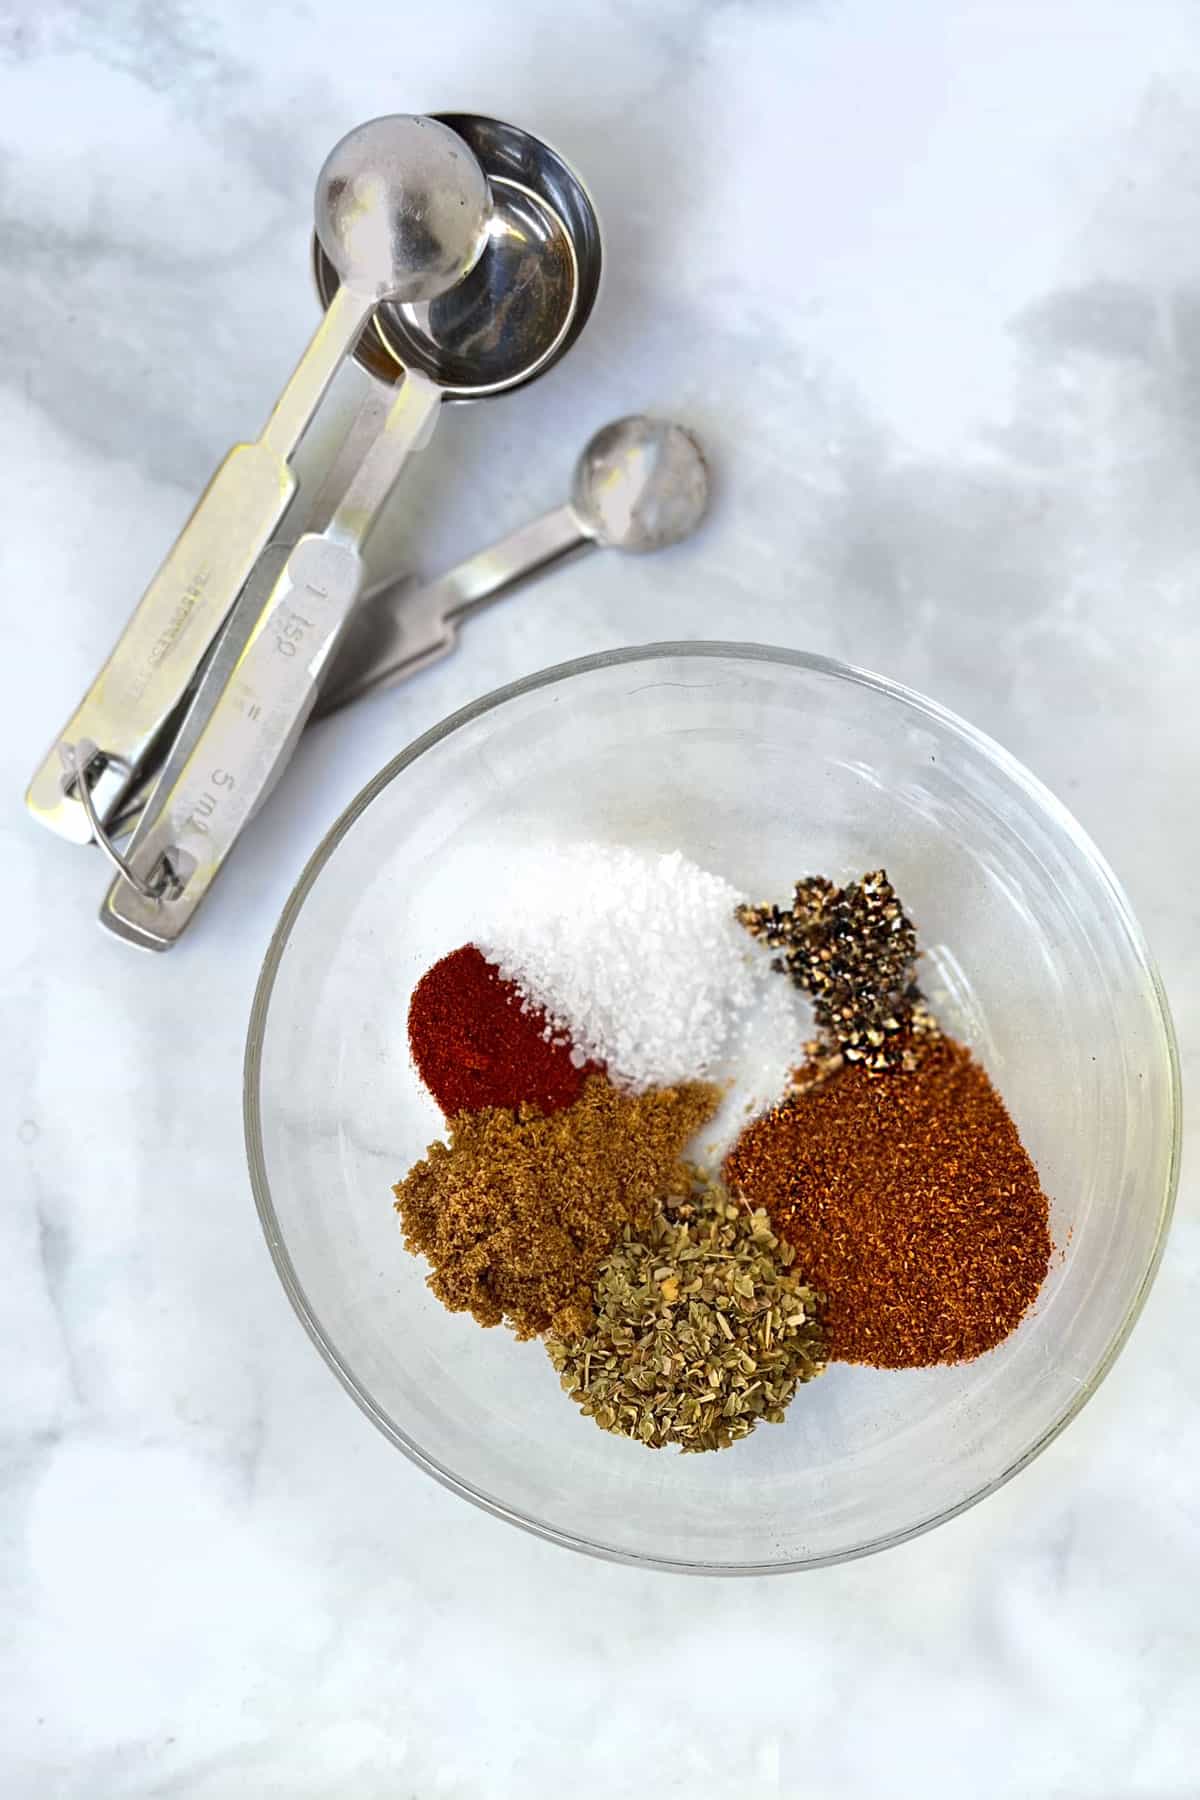 6 different spices in a glass bowl next to measuring spoons